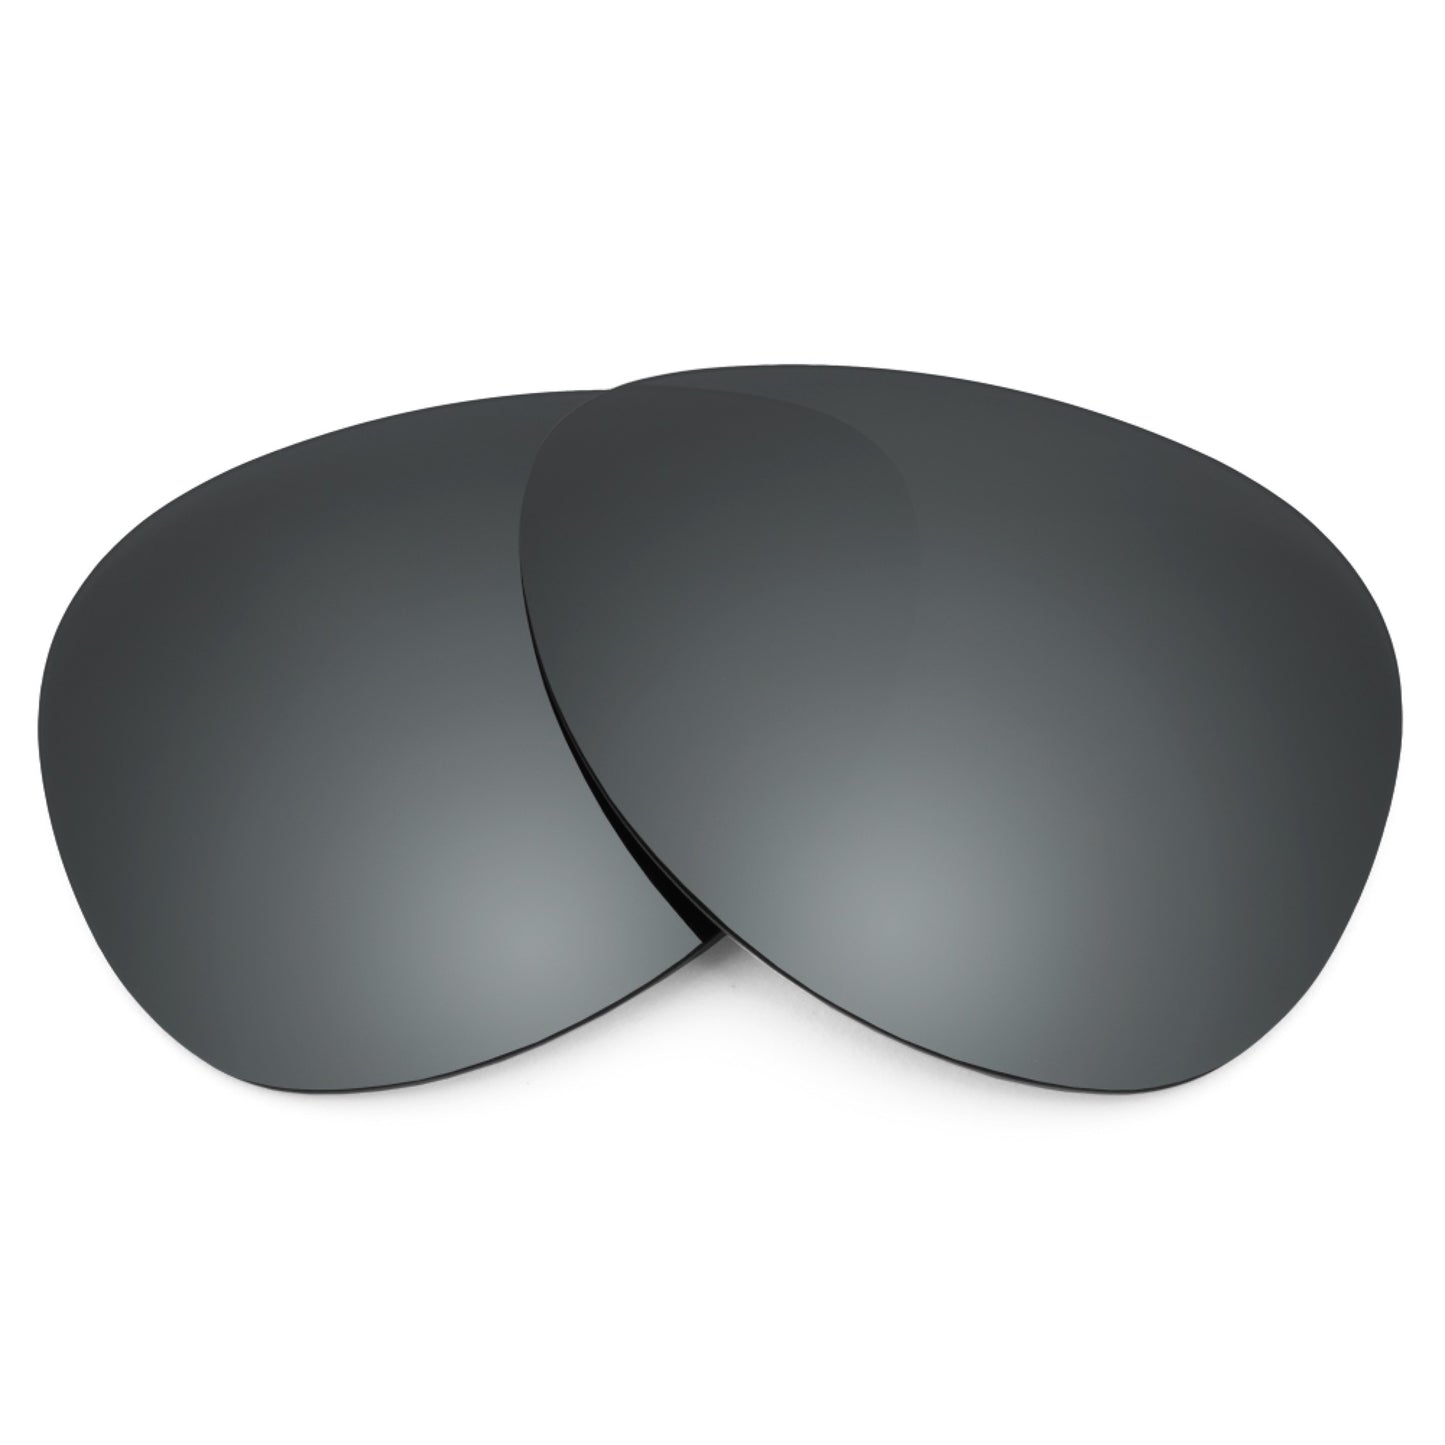 Revant replacement lenses for Ray-Ban New Aviator RB3625 62mm Non-Polarized Black Chrome